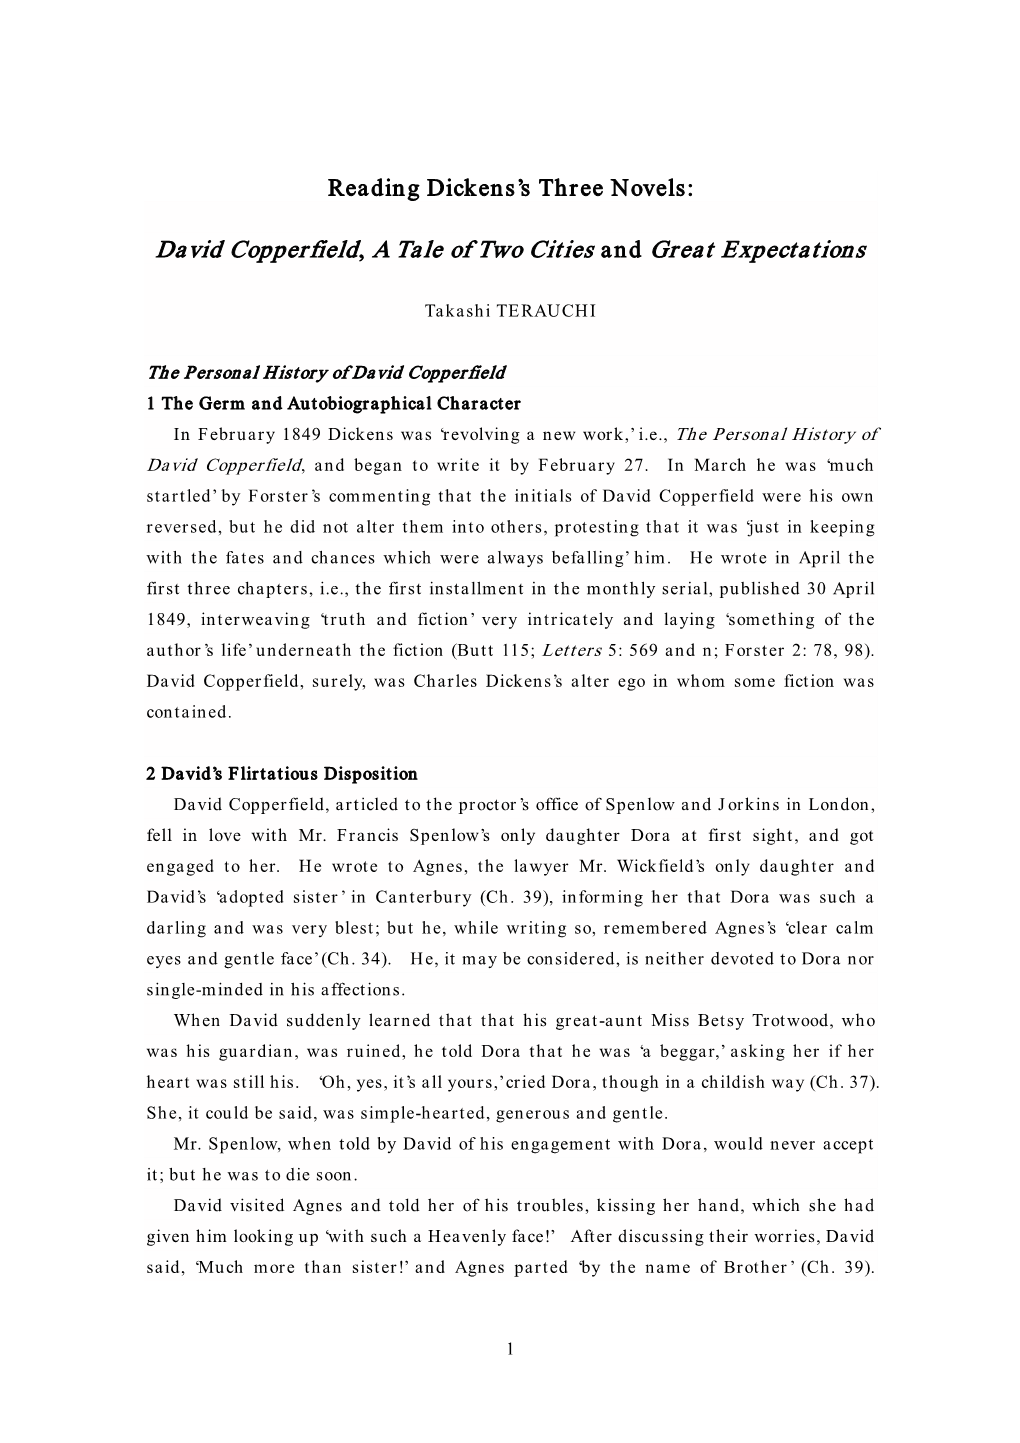 David Copperfield, a Tale of Two Cities and Great Expectations